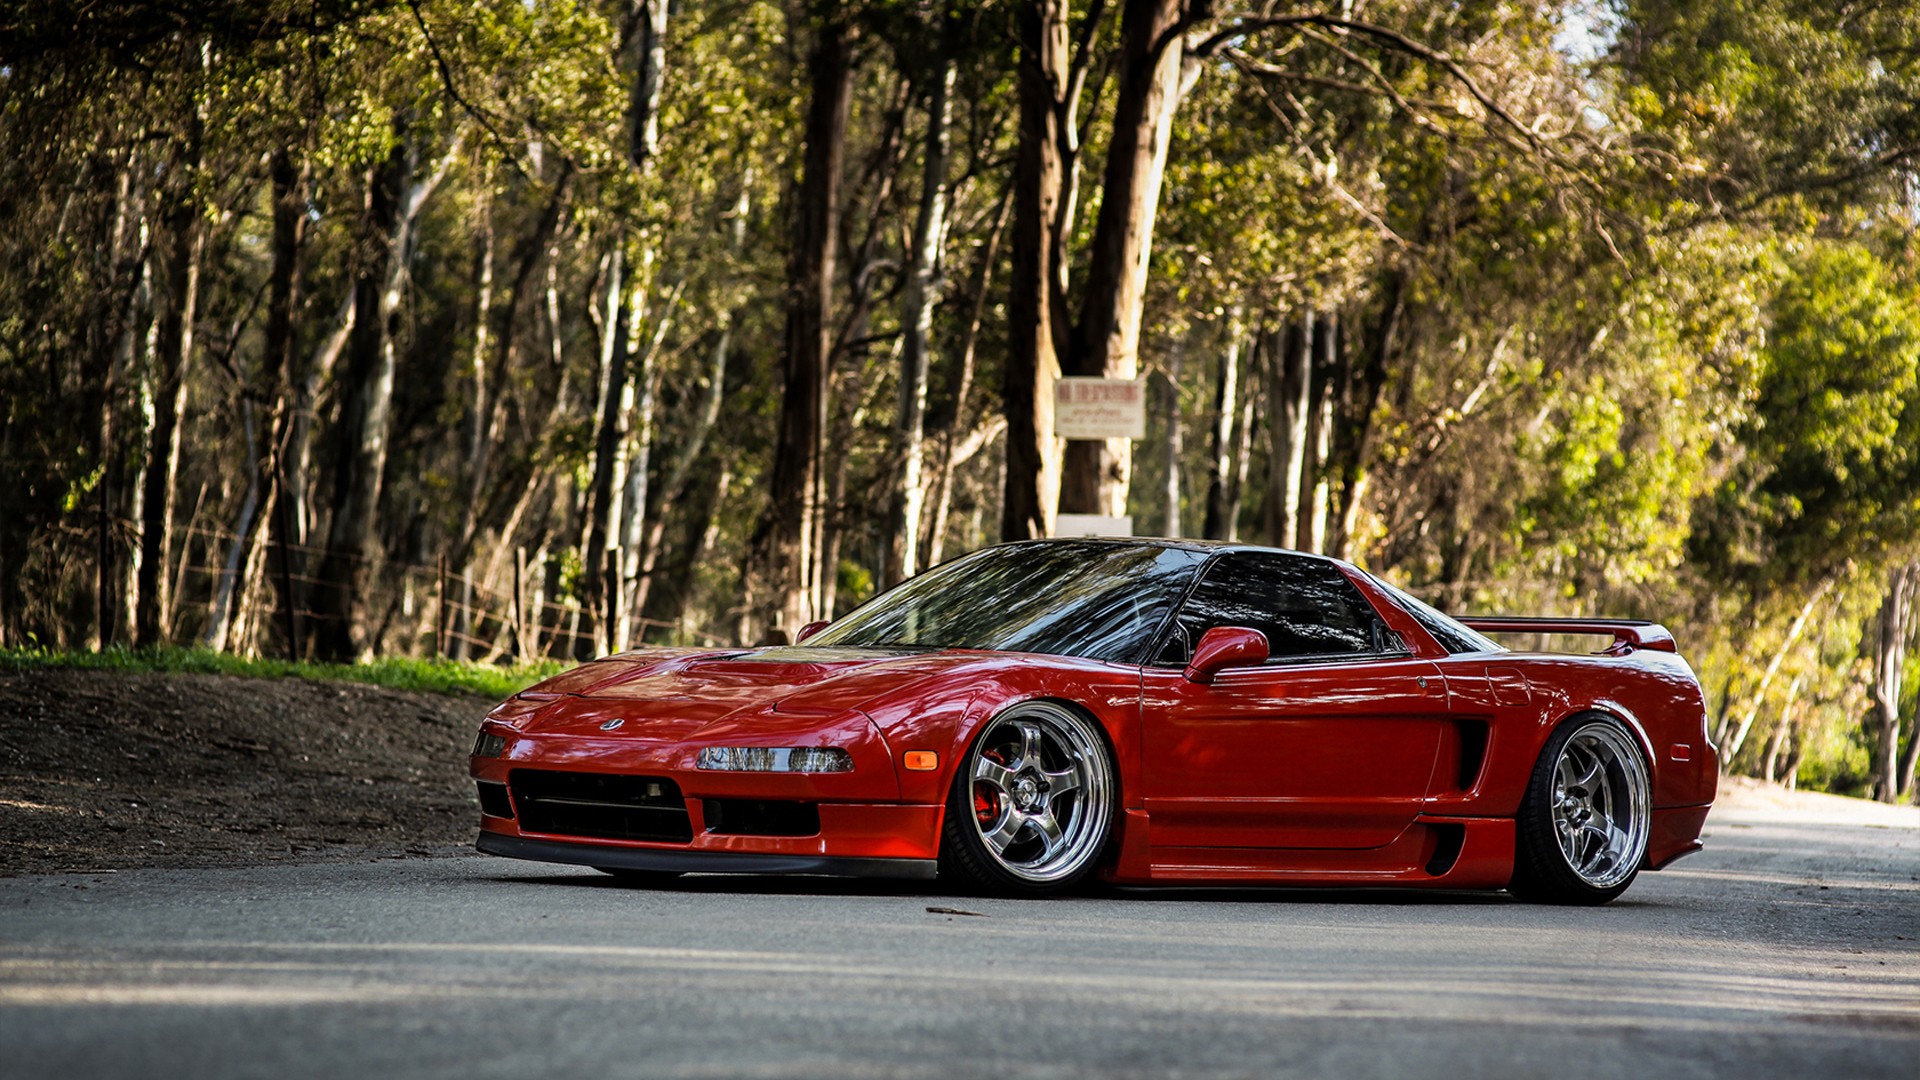 Honda Acura Nsx Slammed Tuning Wallpapers Hd Desktop And Mobile Backgrounds